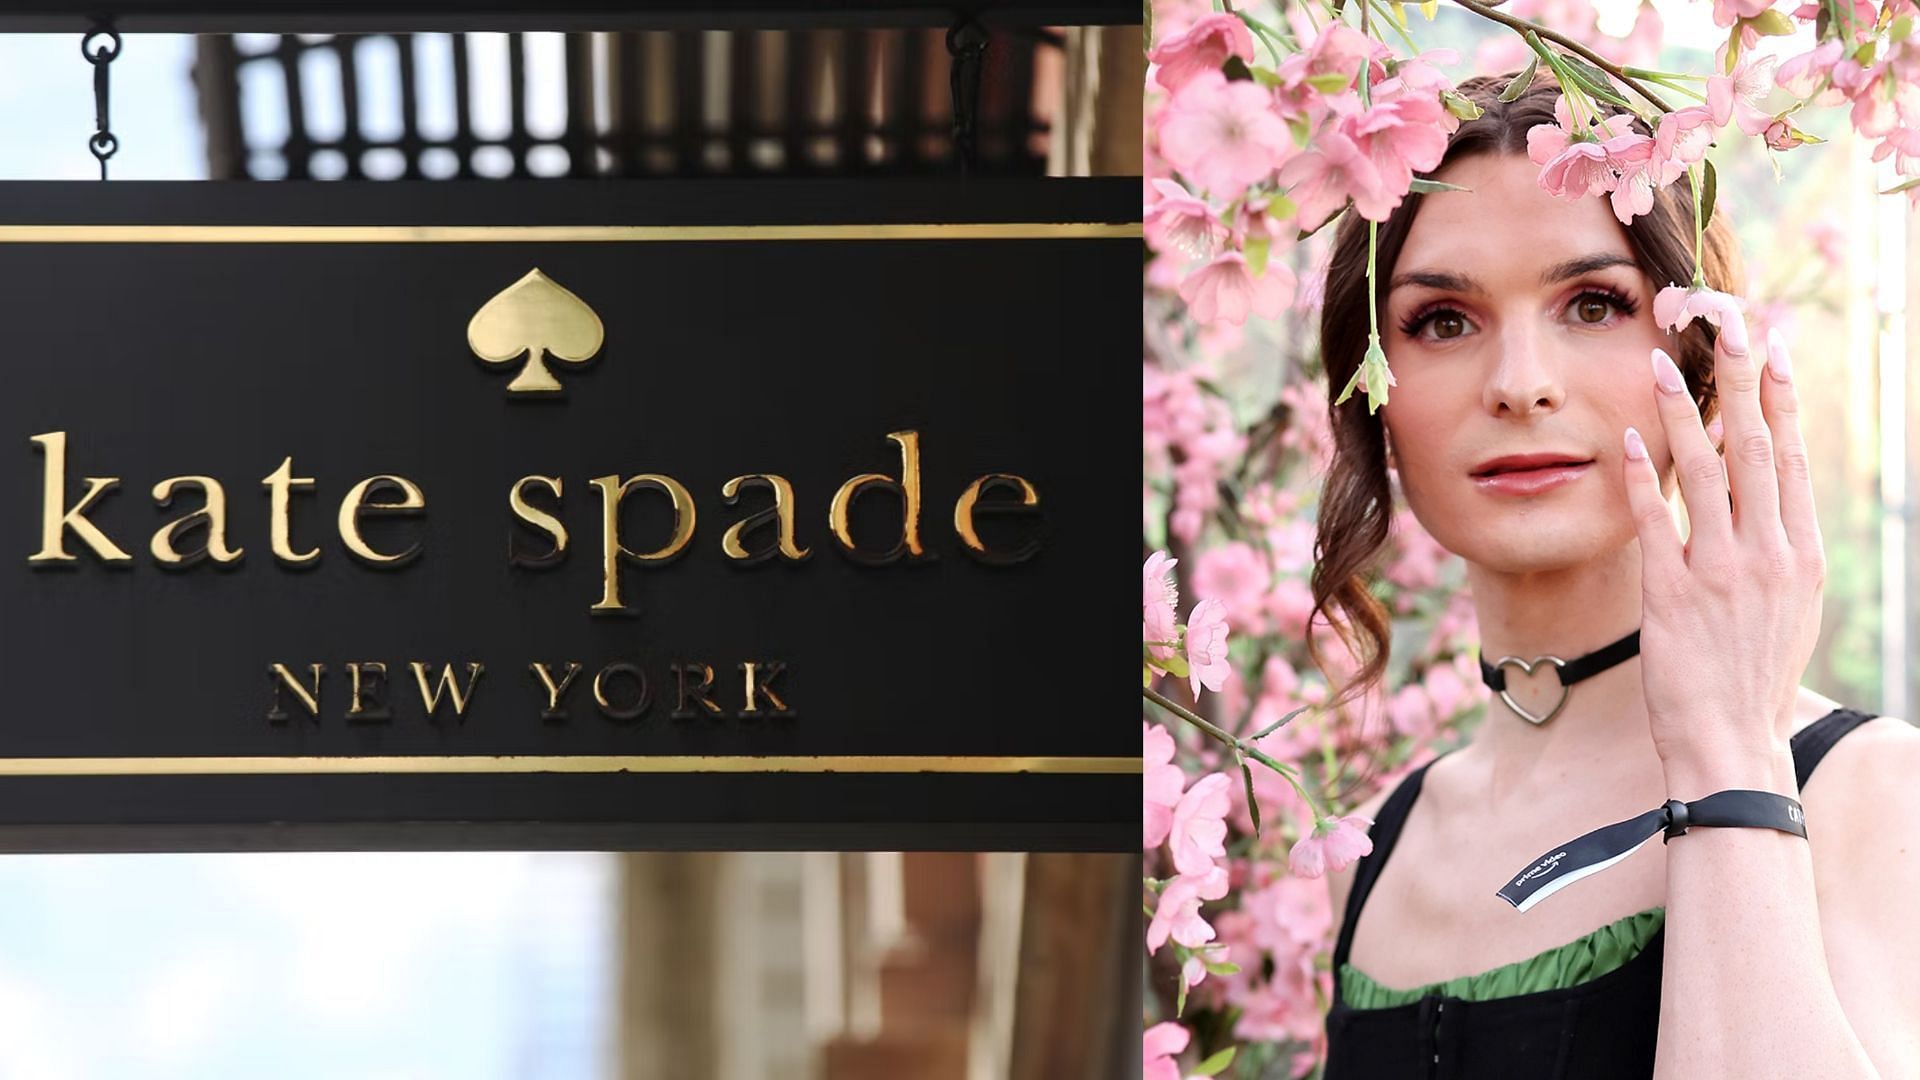 Dylan Mulvaney, Kate Spade, TikTok: No more Kate Spade for me: Iconic  brand sparks controversy over Dylan Mulvaney TikTok promotion